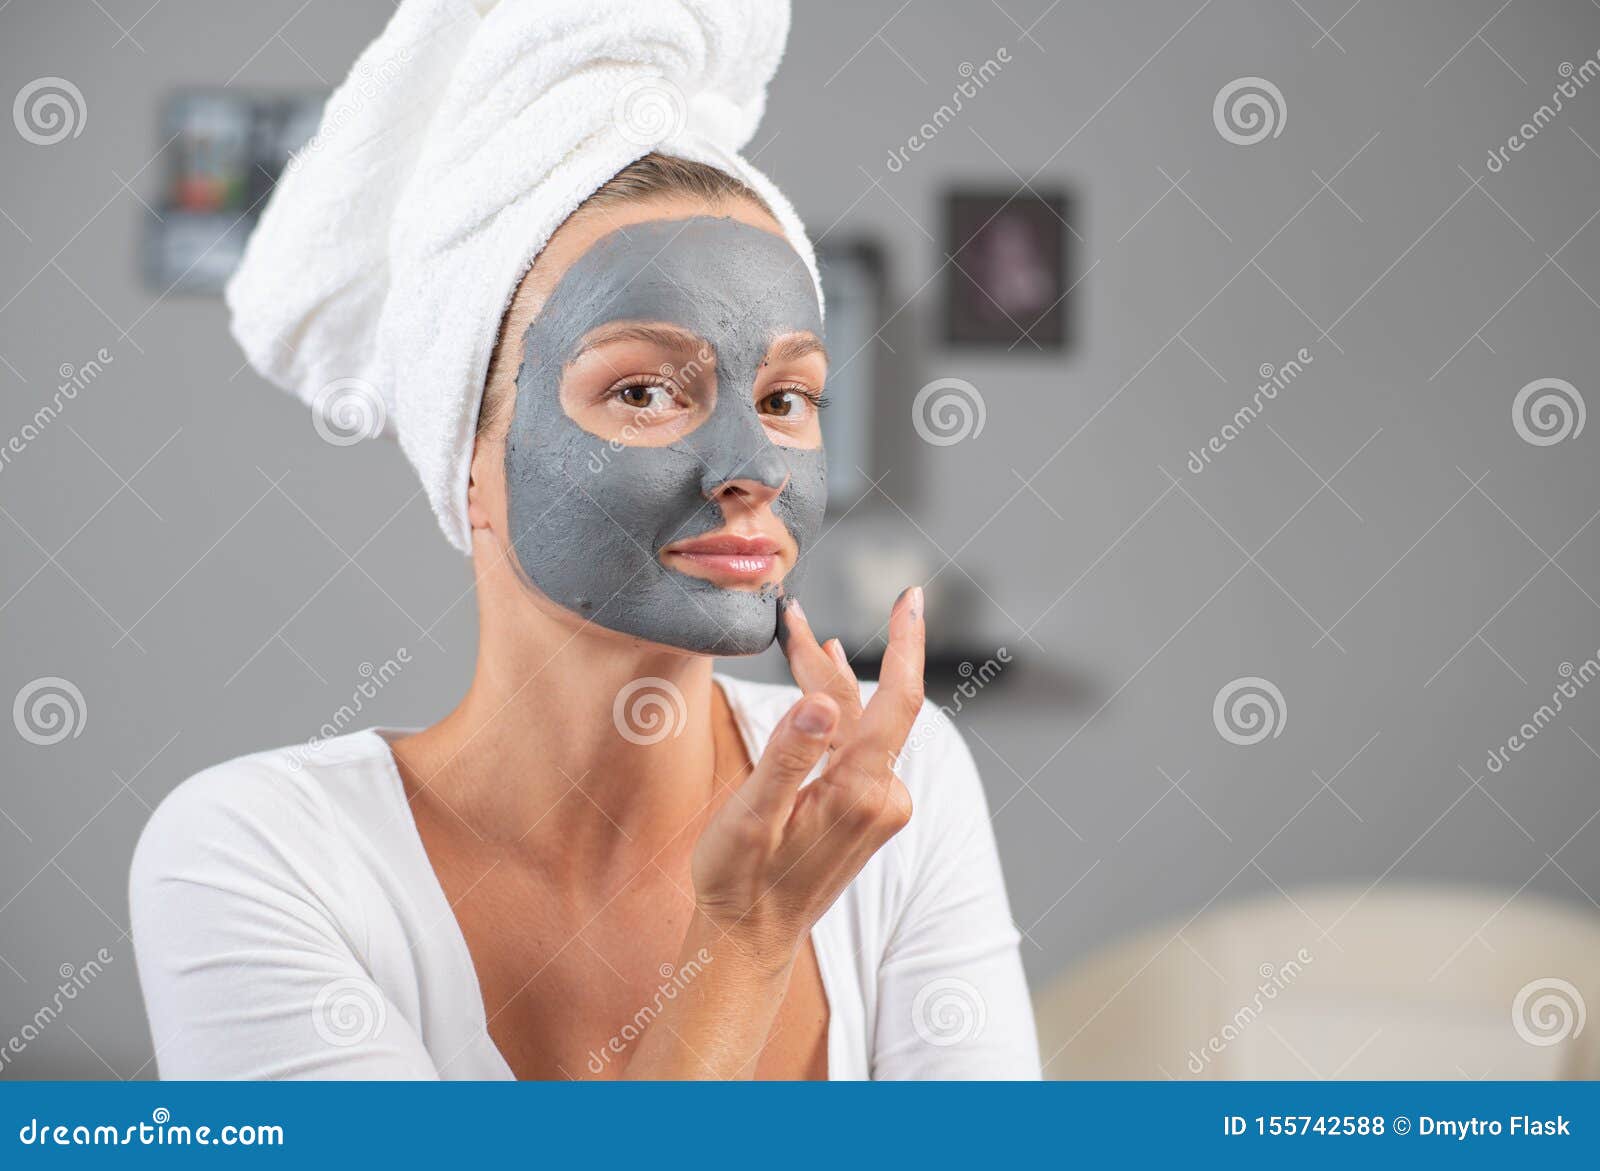 Beautiful Woman is Applying Facial Clay Mask. Beauty Treatments and ...